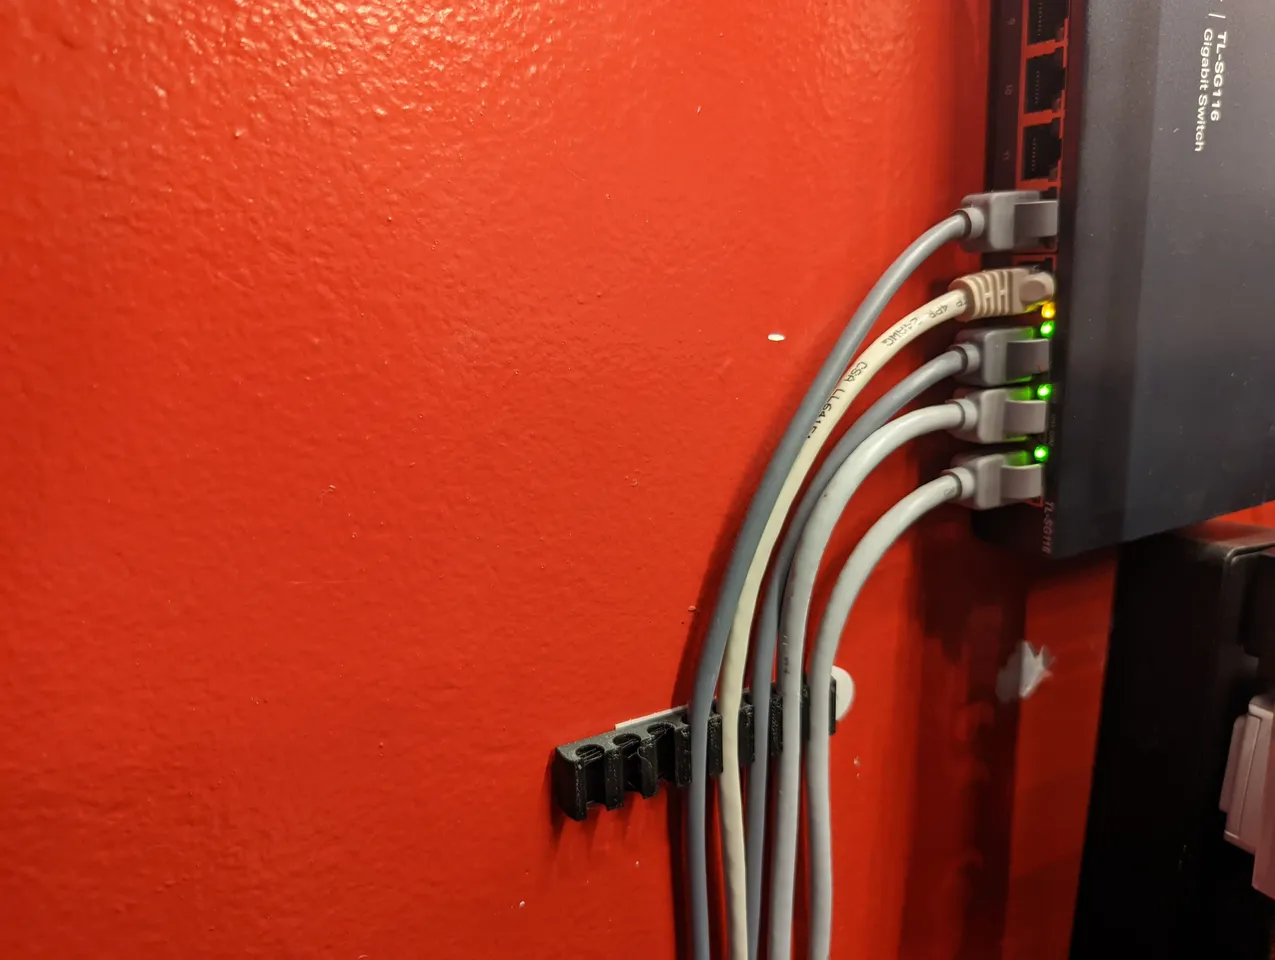 Cable Management Hook by Pluto3301